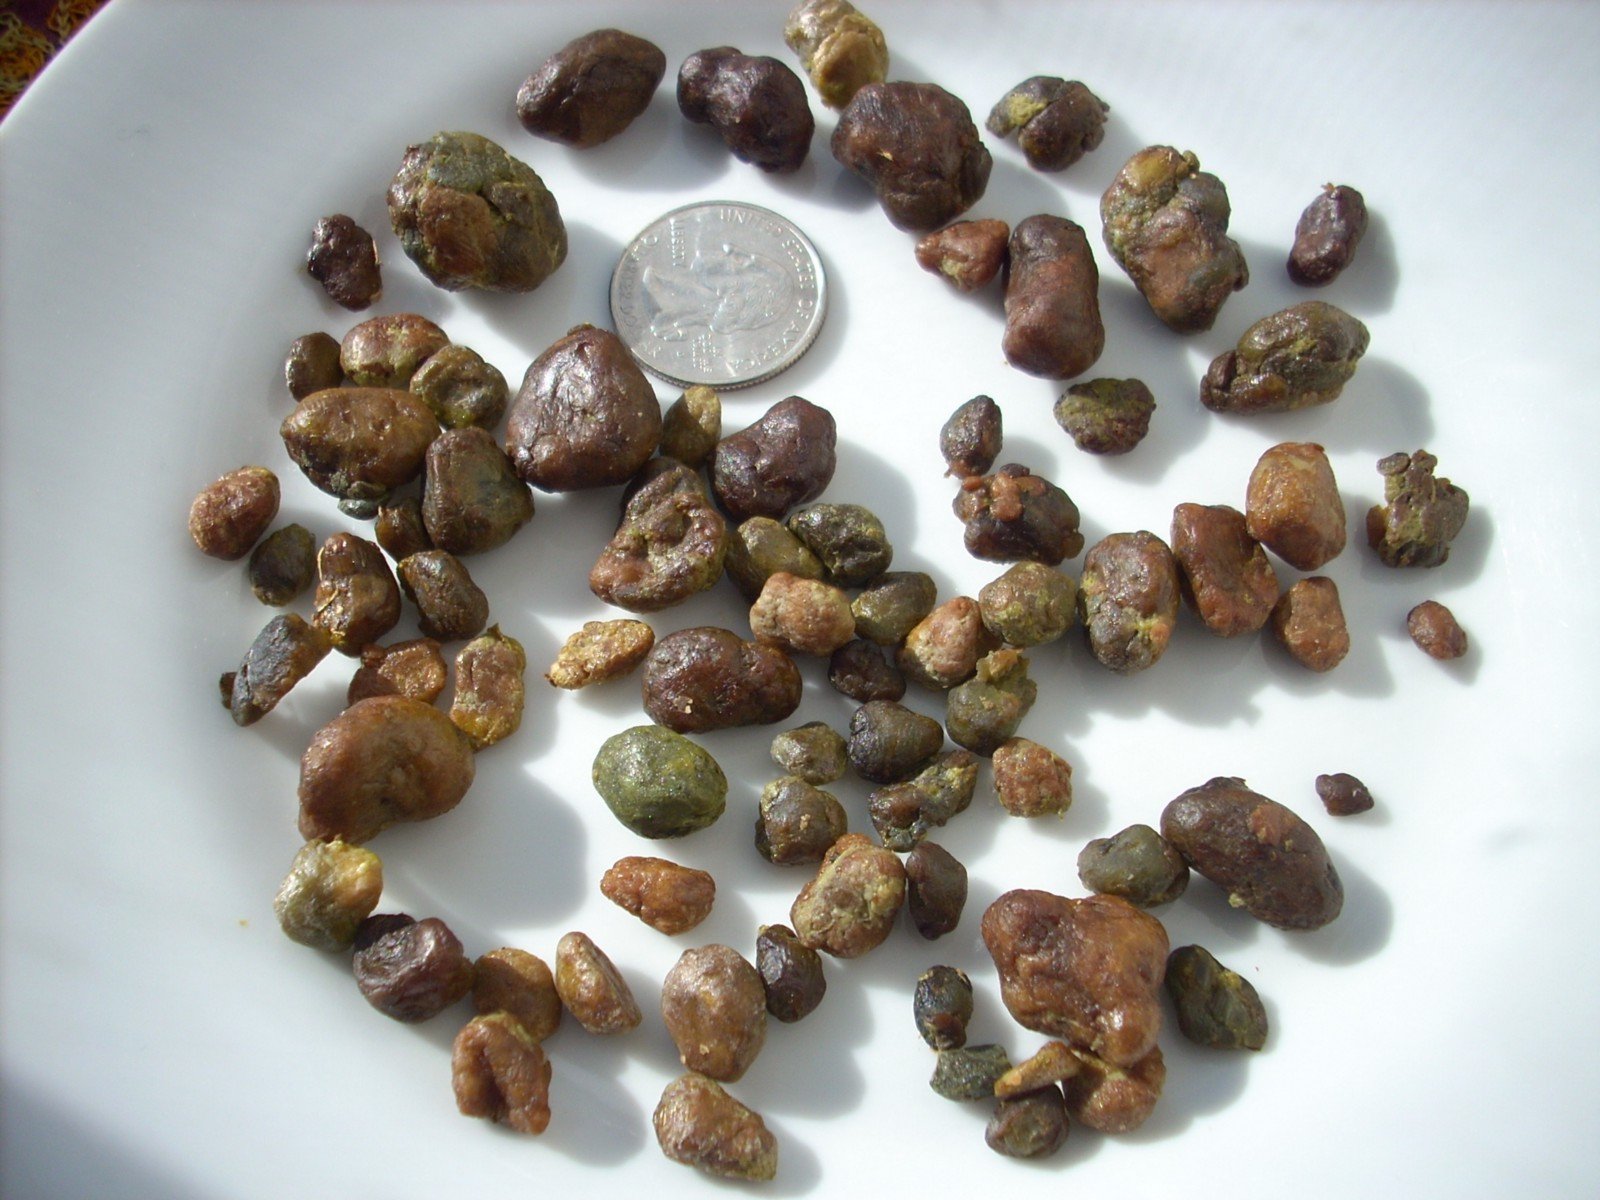 How to get rid of kidney stones naturally without surgery